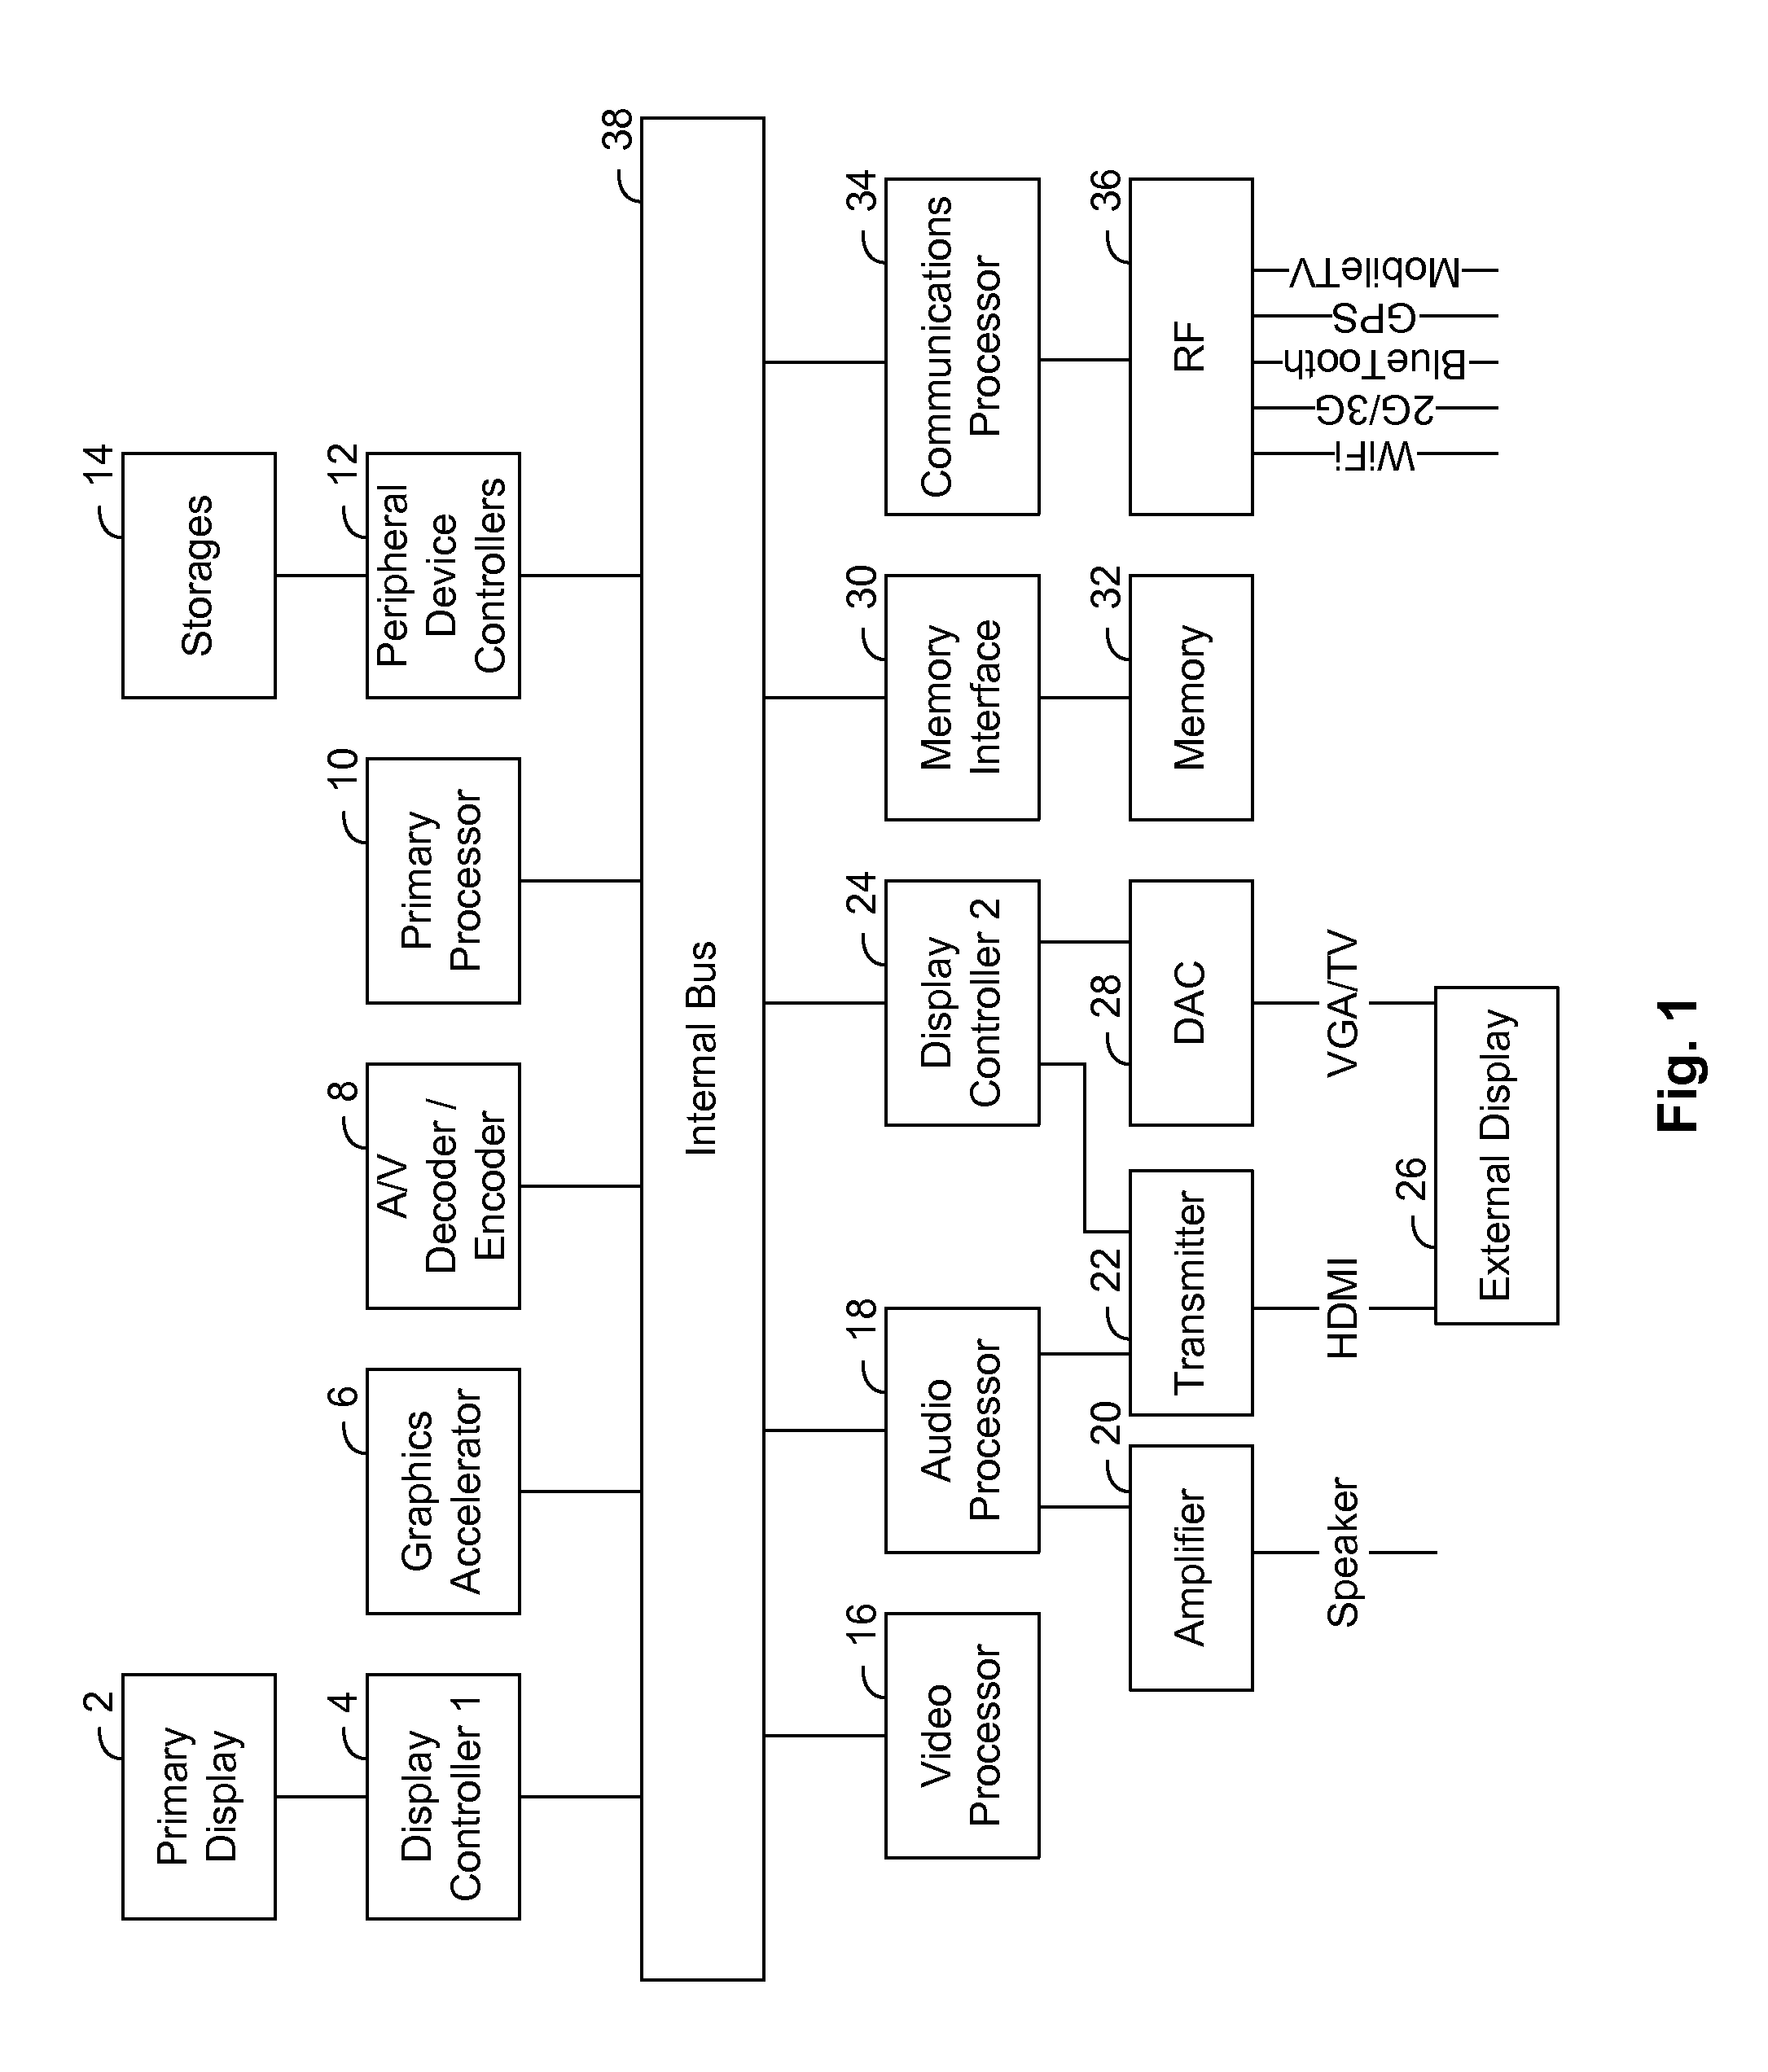 Systems and Methods for Driving an External Display Device Using a Mobile Phone Device